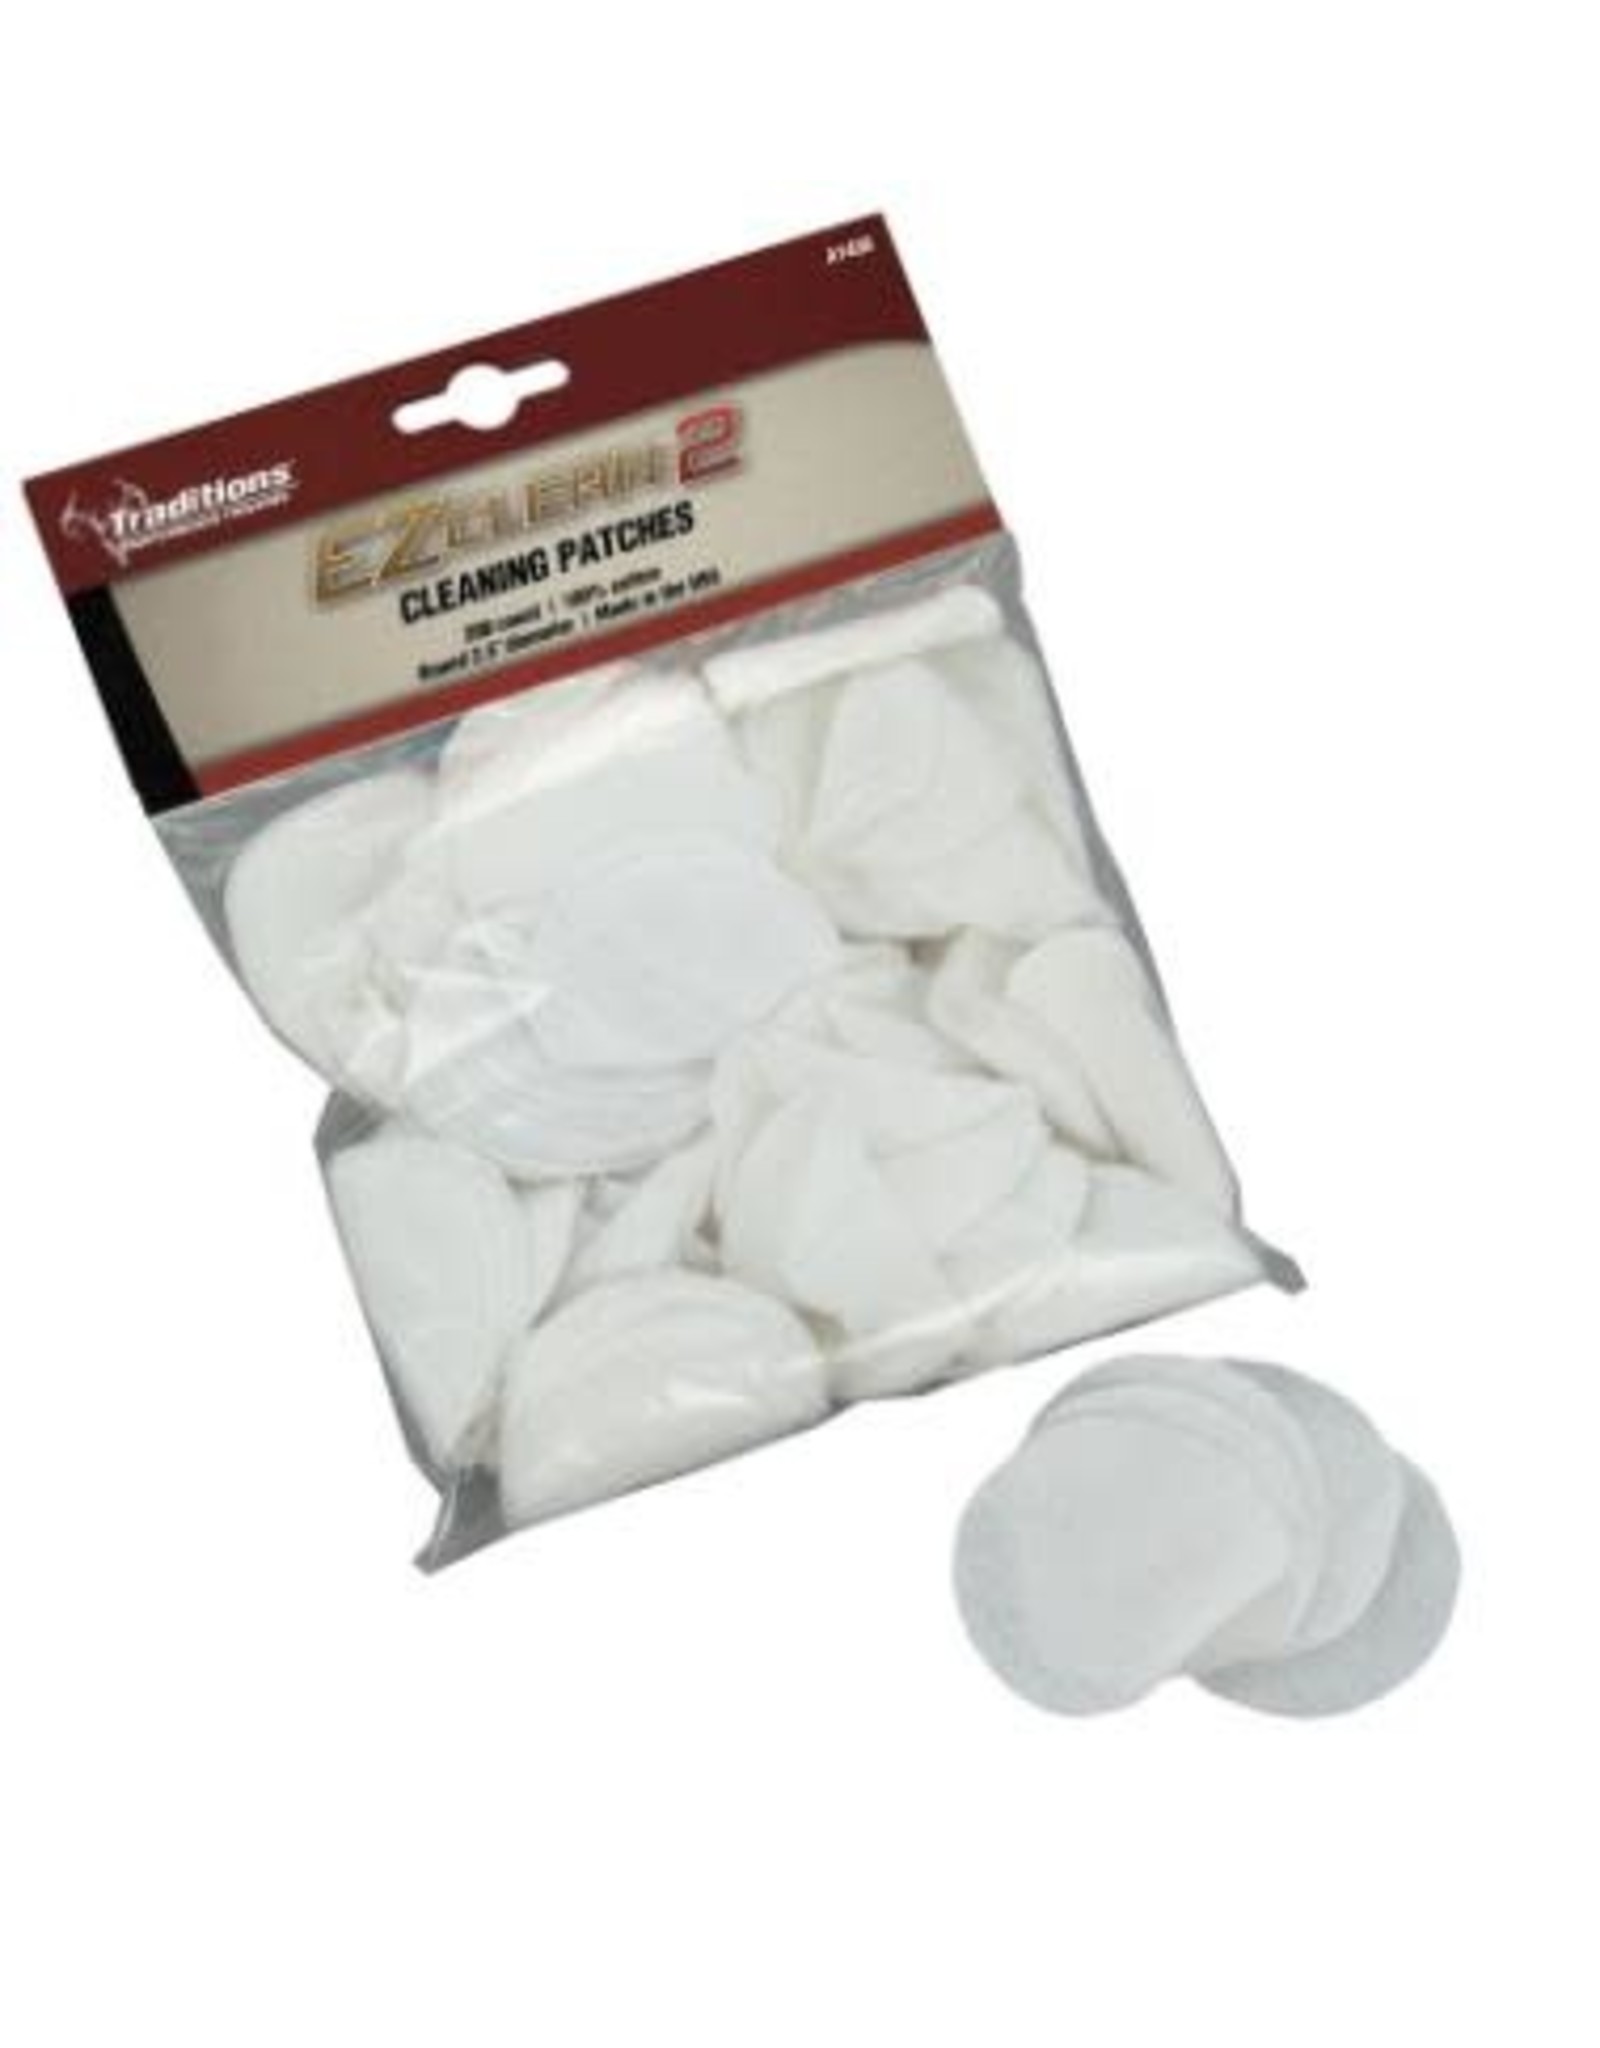 Traditions Traditions Cleaning Patches - .45 -.54 Cal